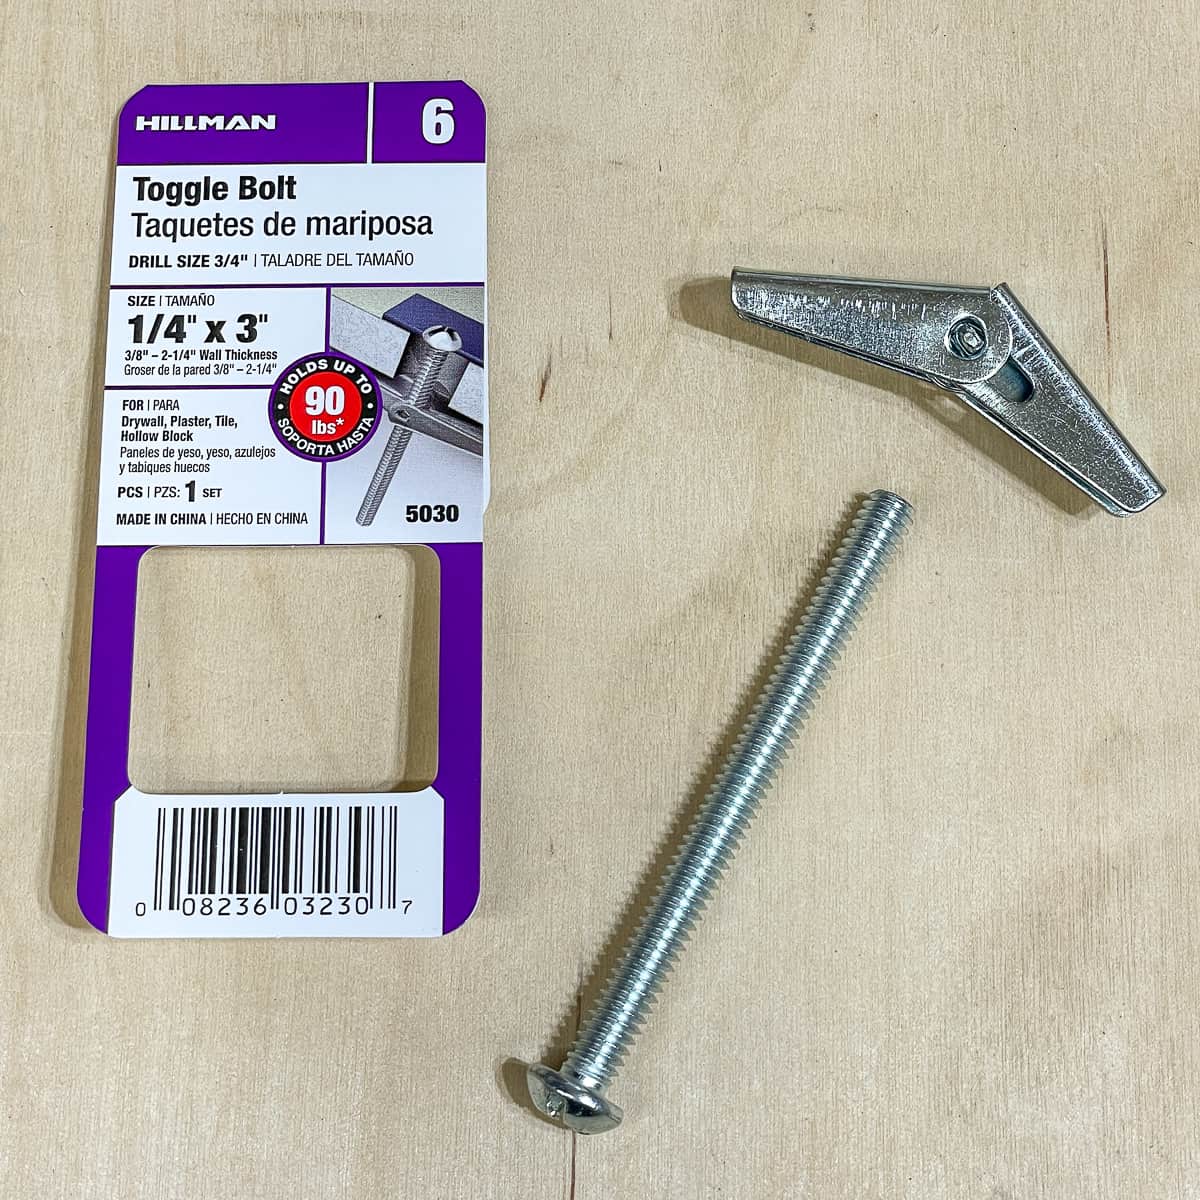 toggle bolt with packaging